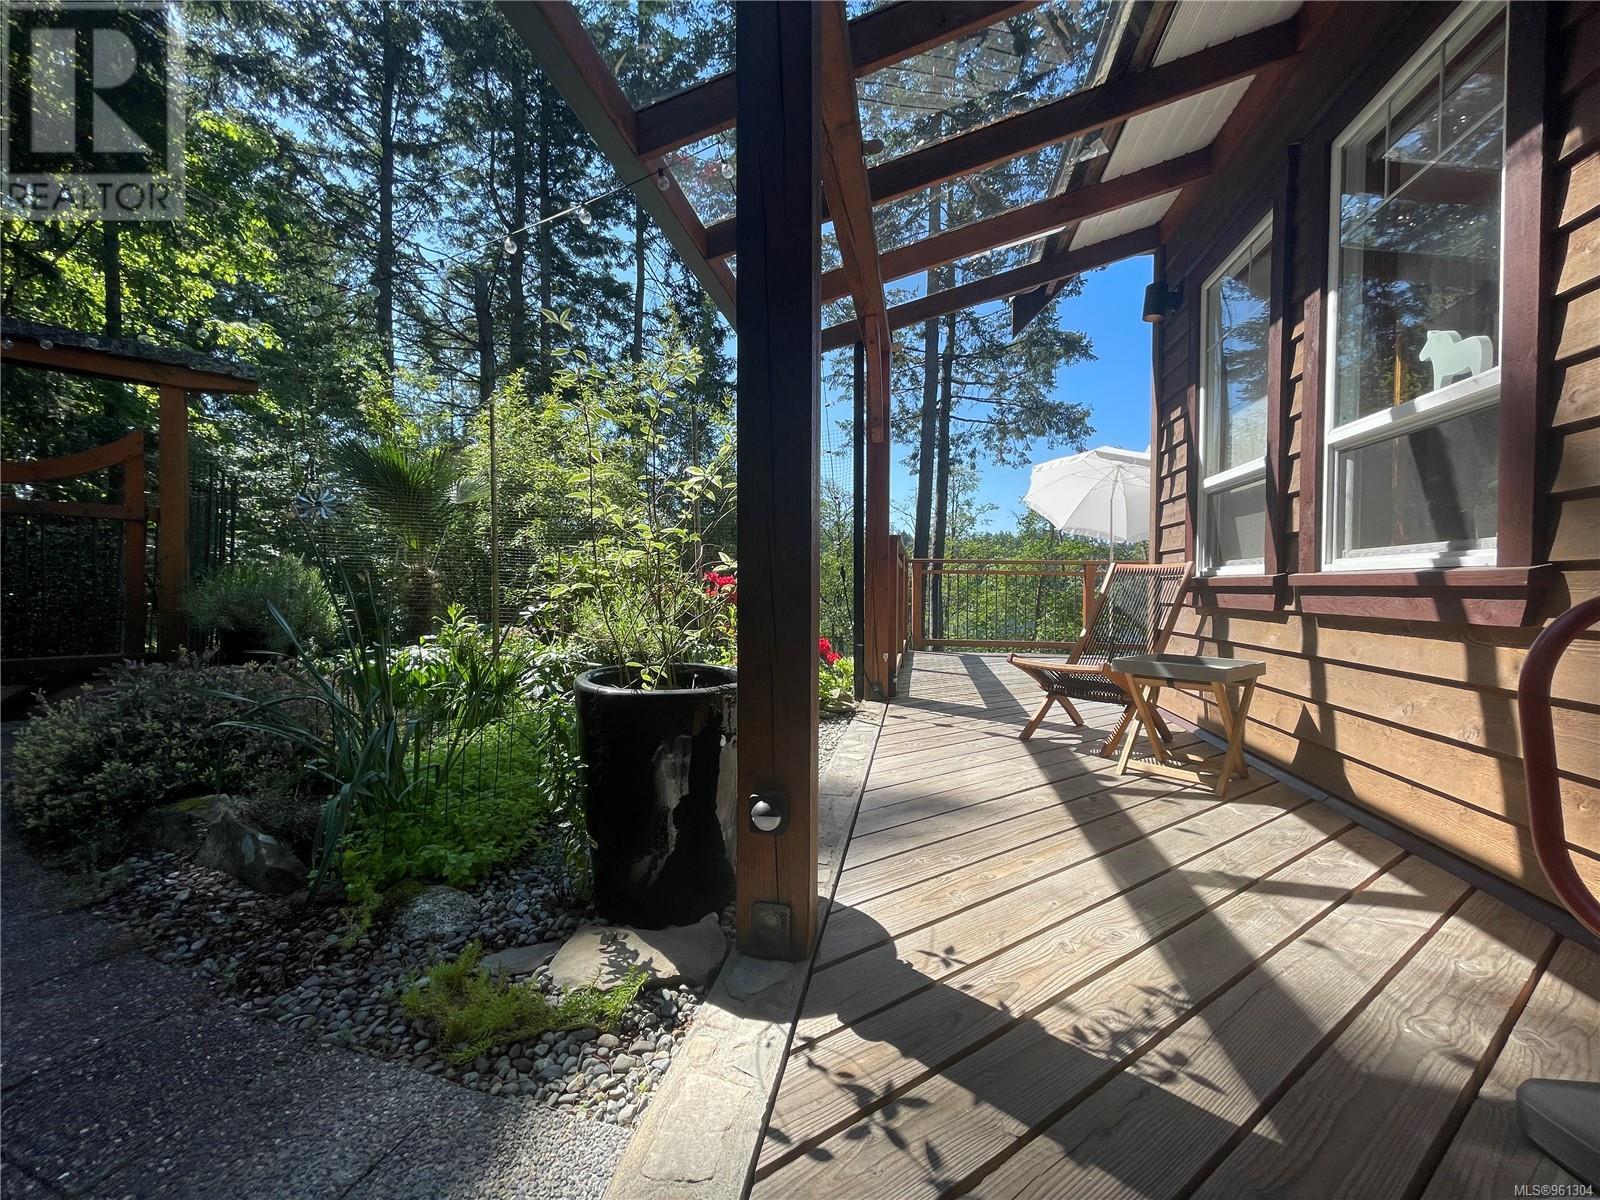 3711 Compass Cres, Pender Island